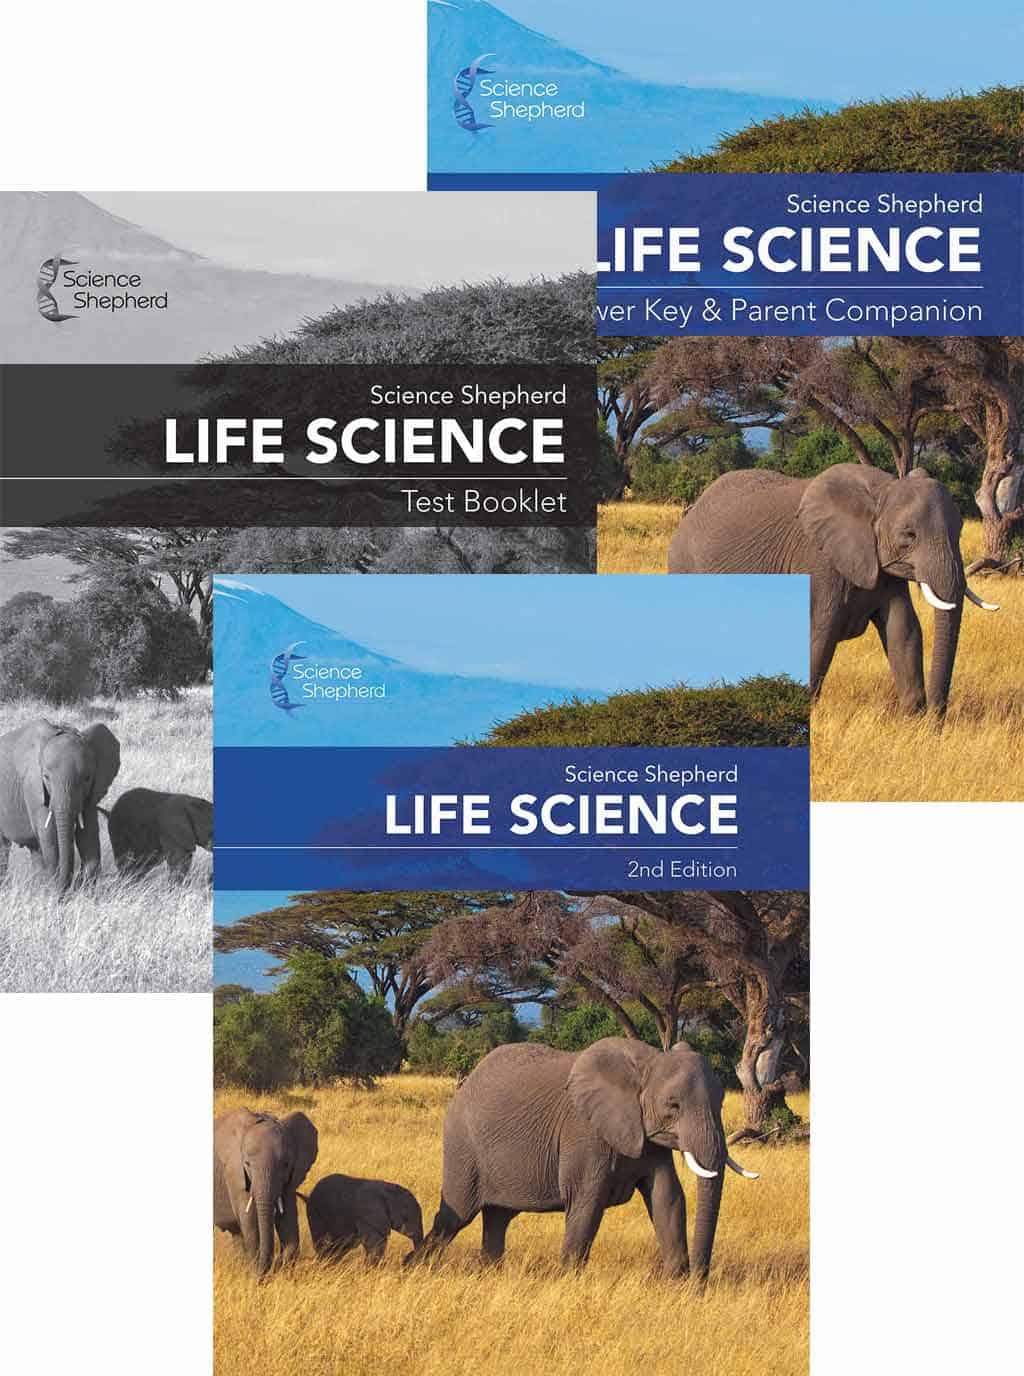 Science Shepherd Life Science homeschool curriculum covers of the textbook, test book and answer key